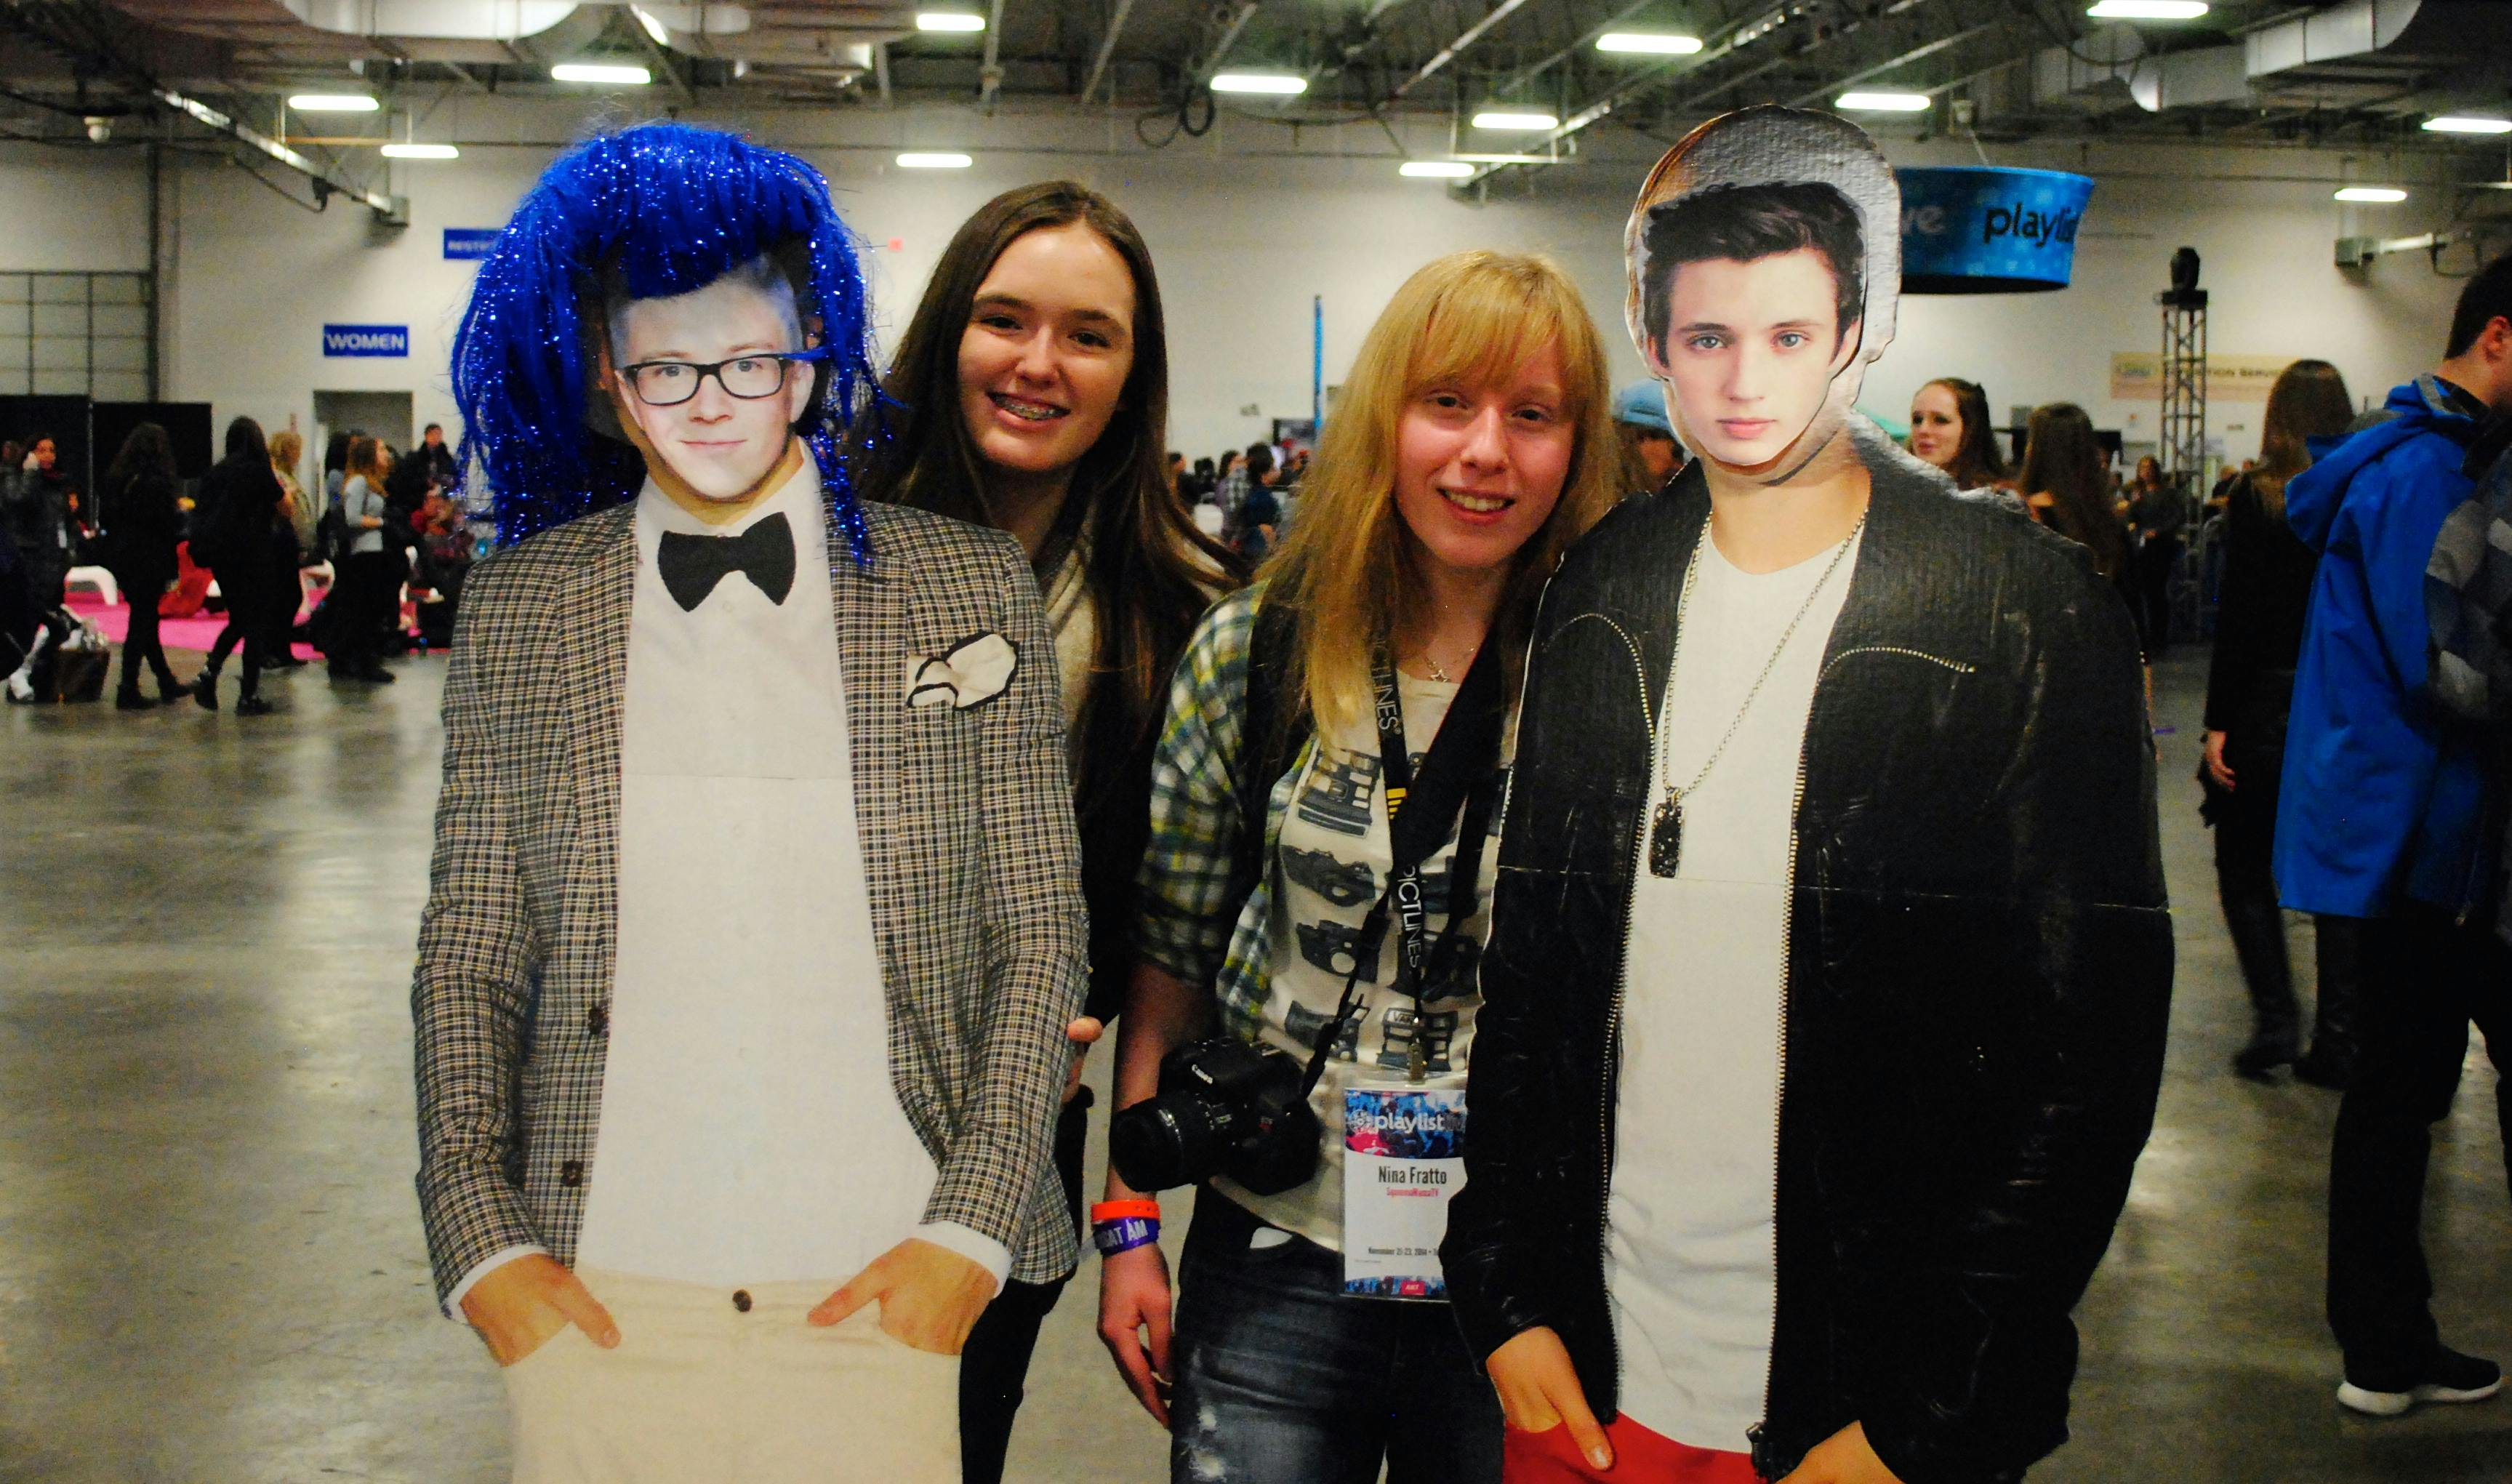 Fans pose with cutouts of Tyler Oakley and Troye Sivan